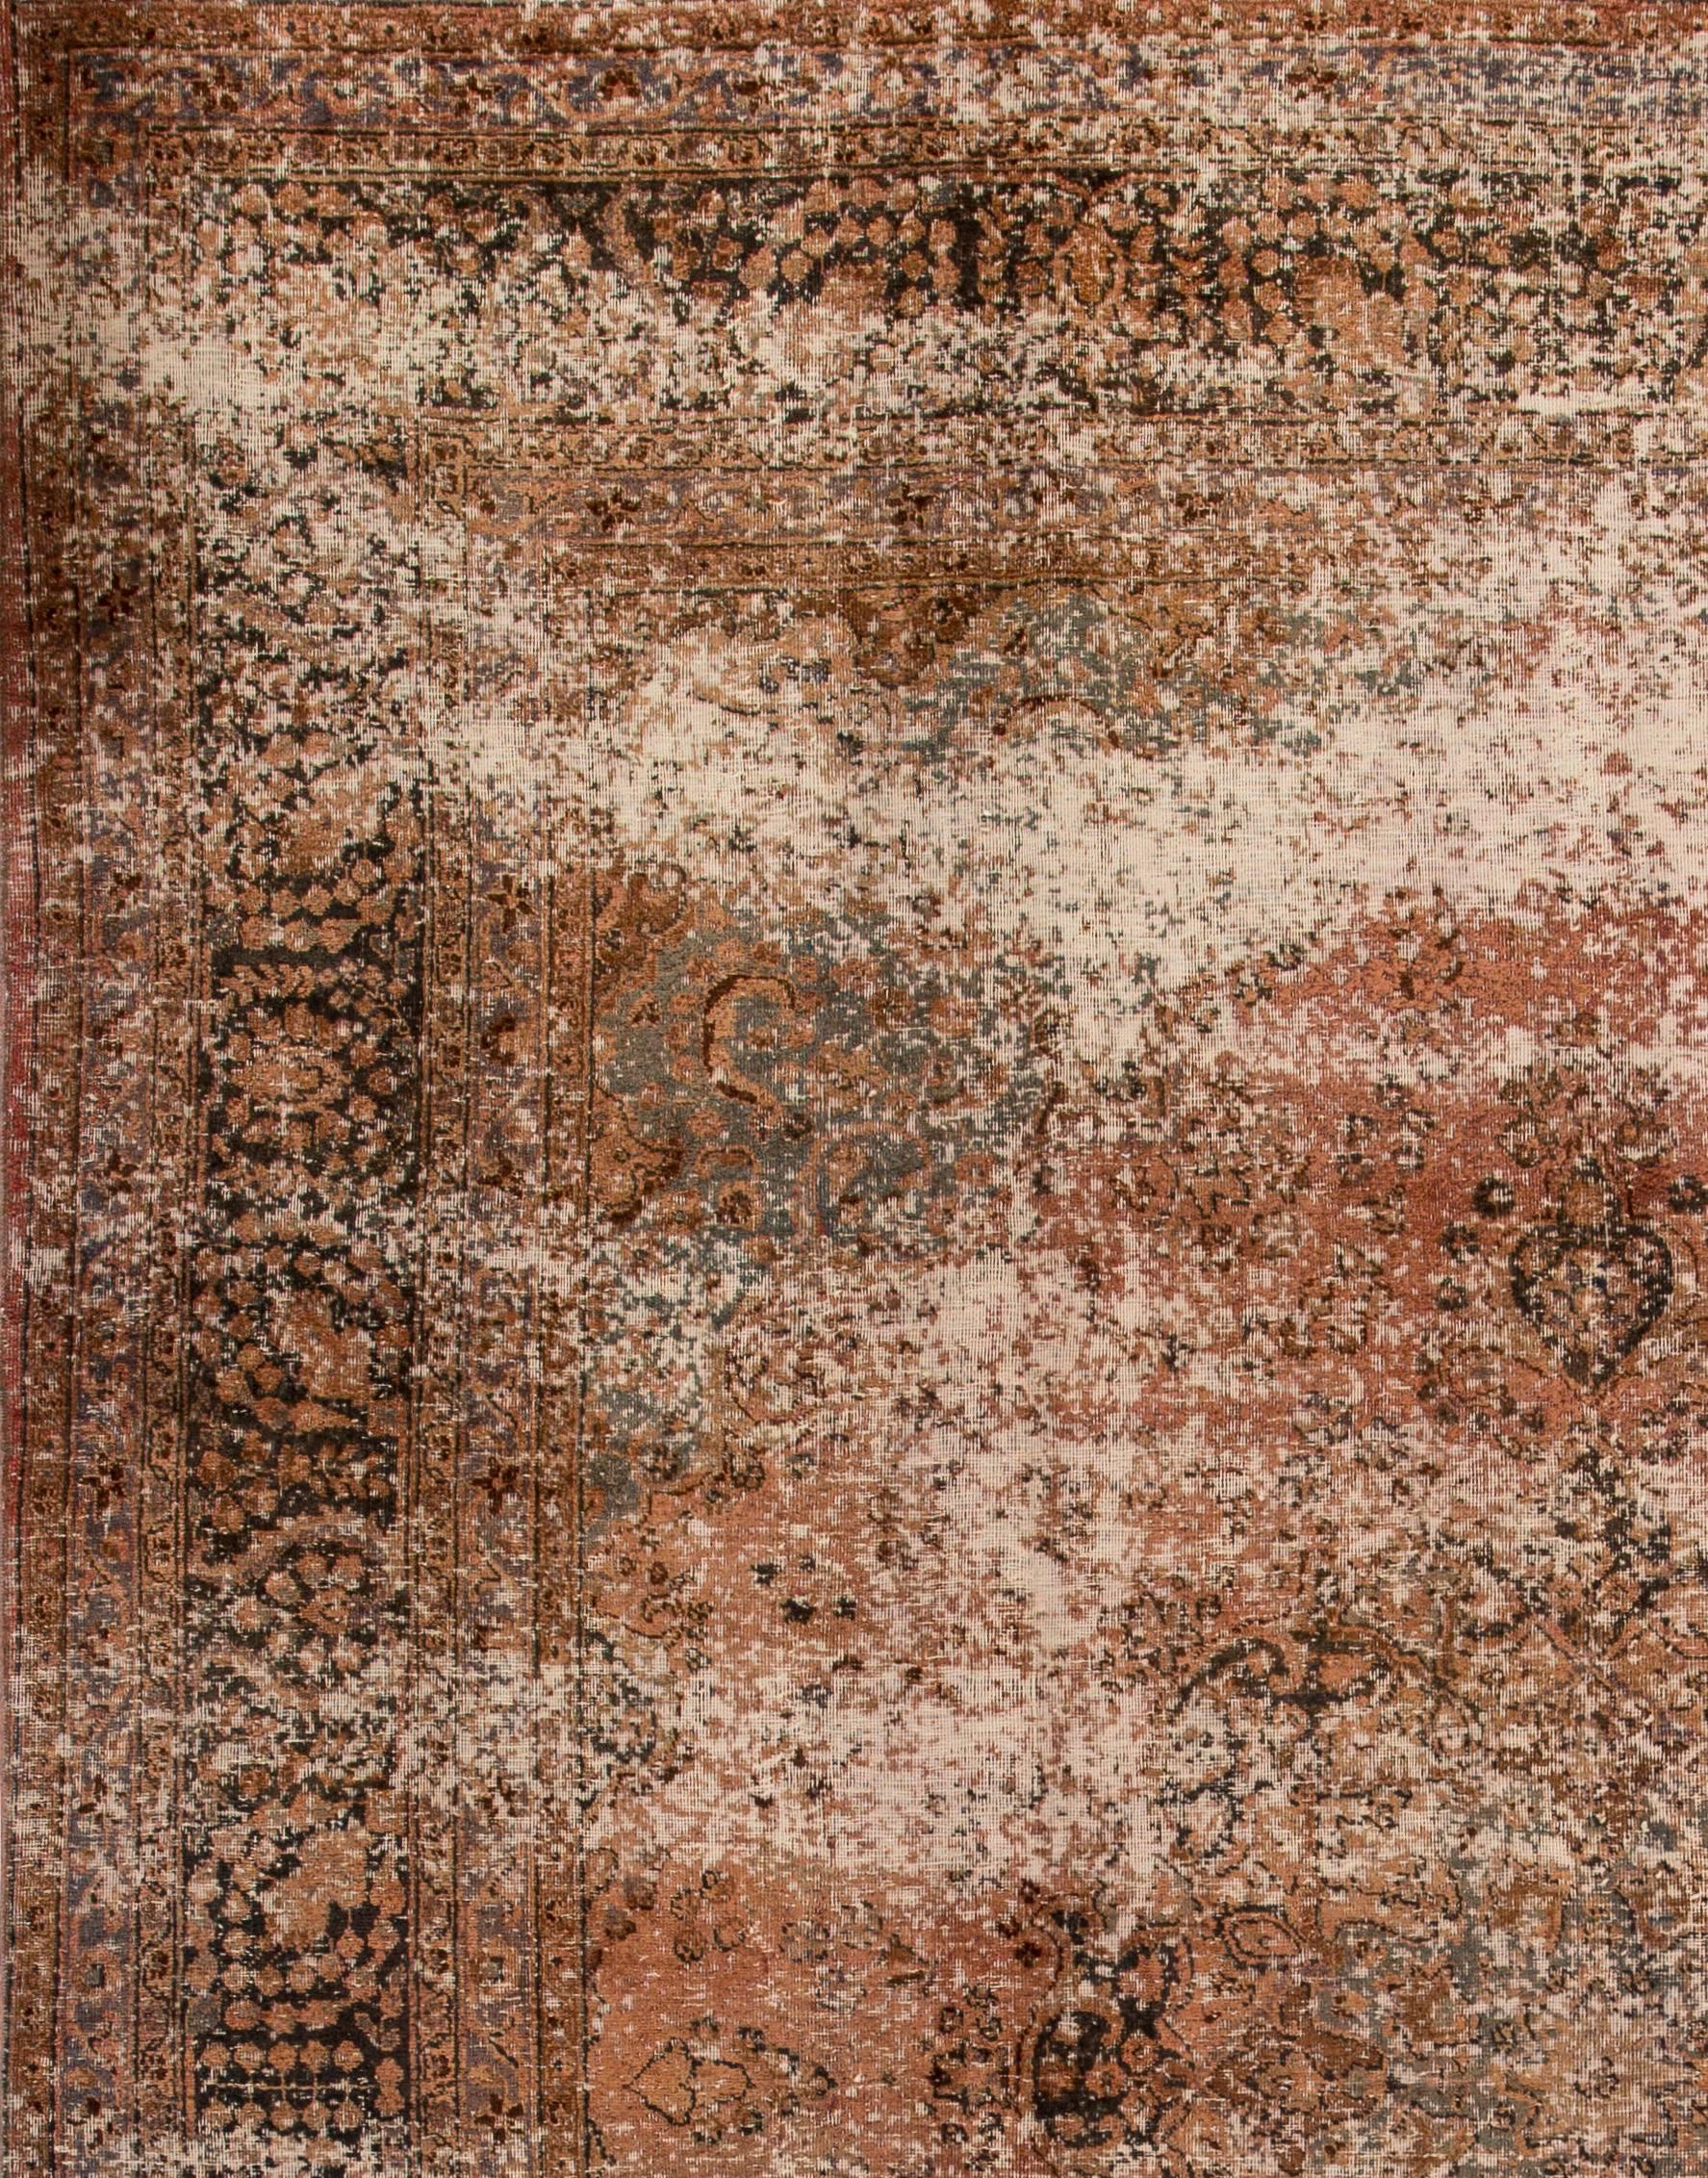 A vintage hand-knotted overdyed distressed rug with an all-over design. This rug measures: 9'5